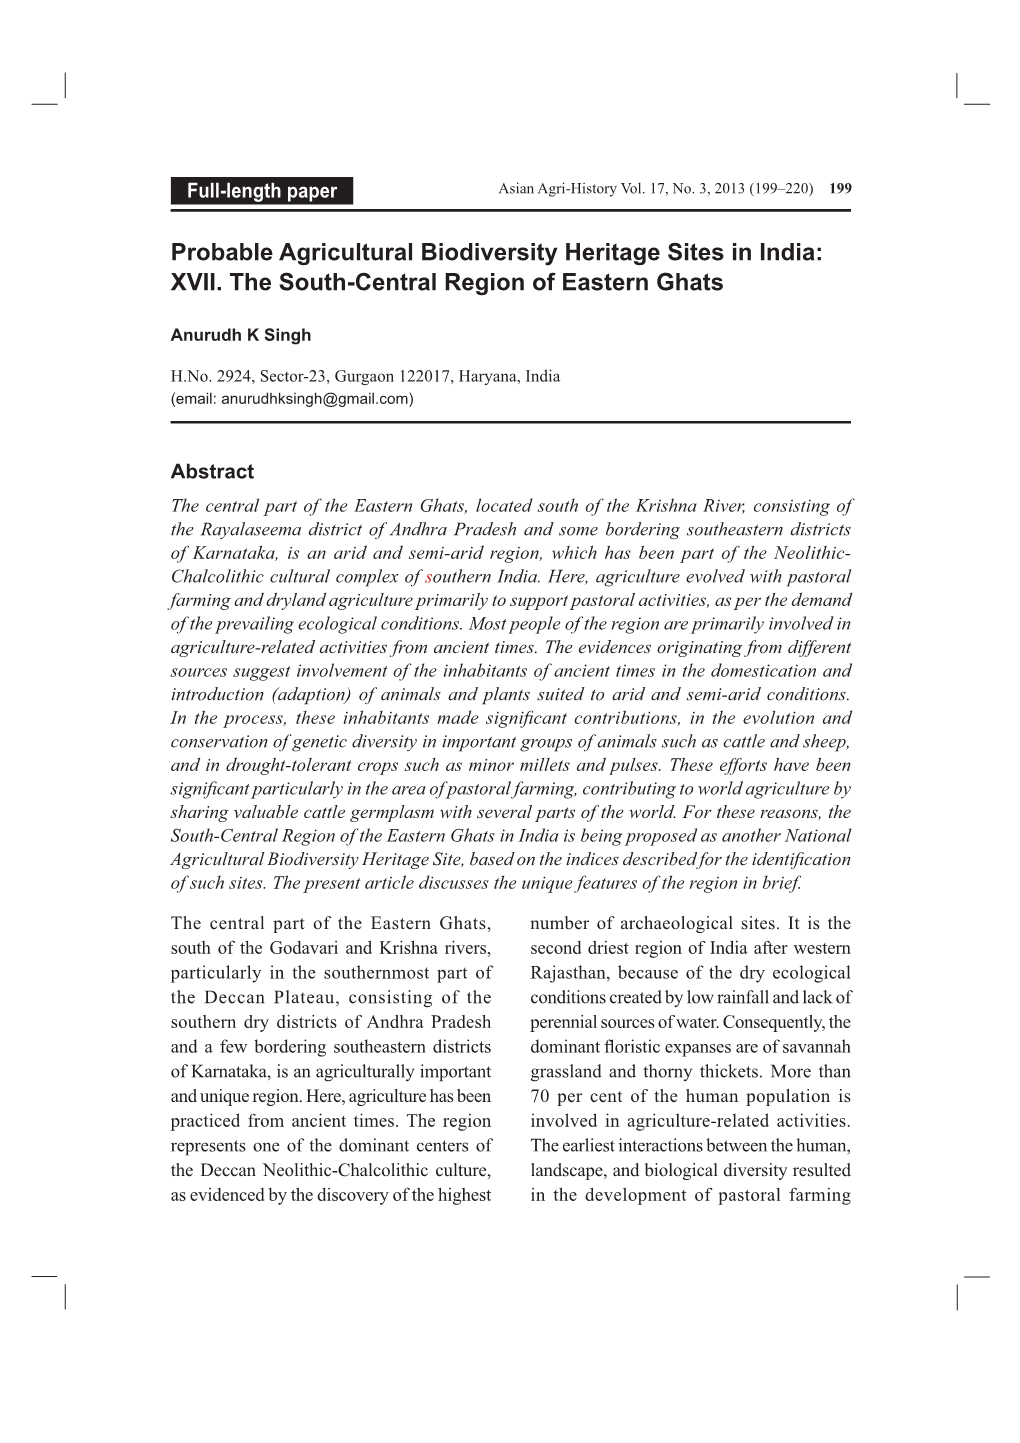 Probable Agricultural Biodiversity Heritage Sites in India : XVII. the South-Central Region of Eastern Ghats